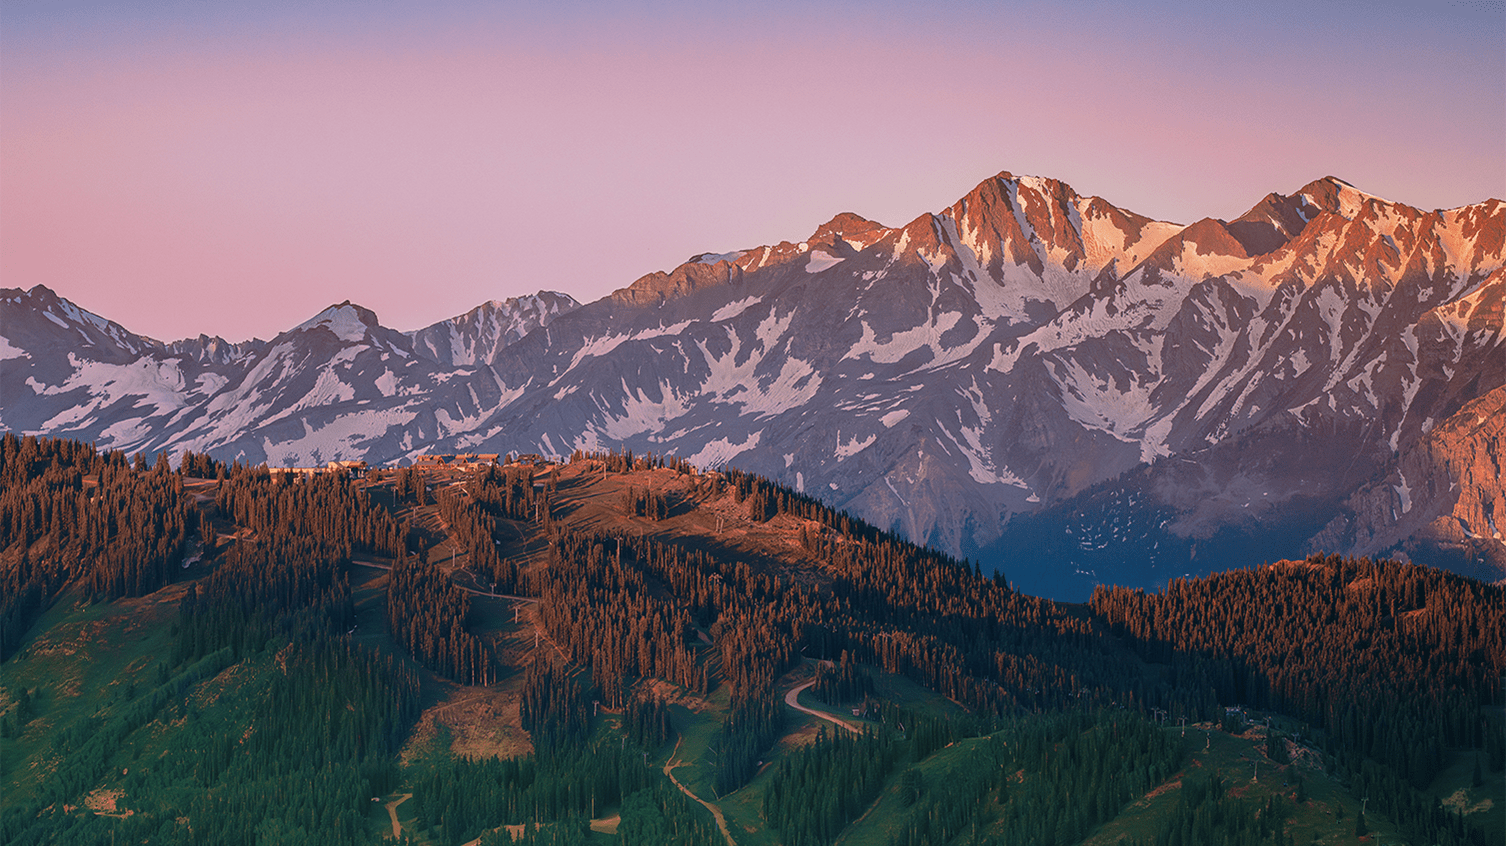 View of Aspen Mountain at dusk, with a purple glow, during the summer